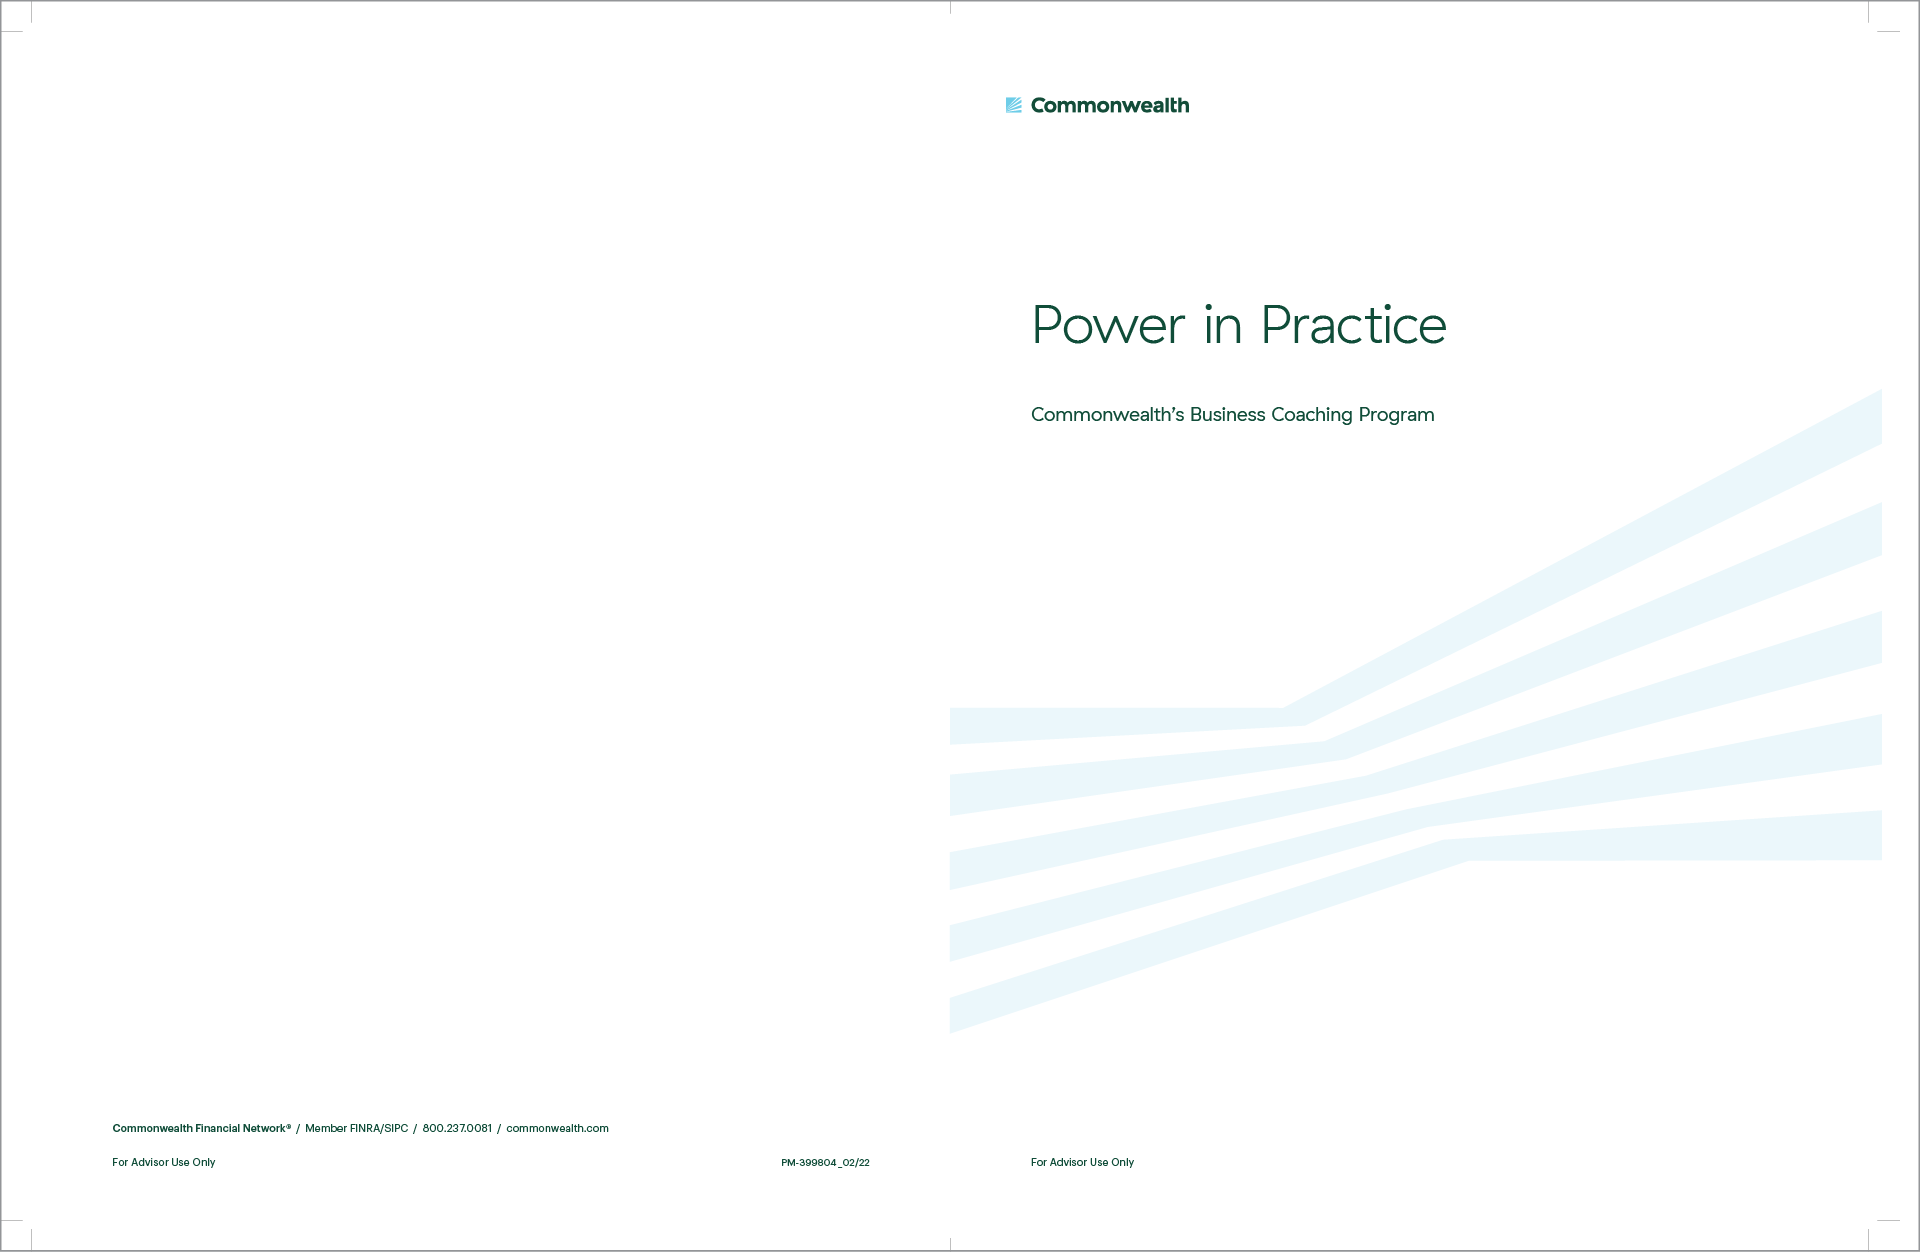 One of the spreads from Power in Practice workshop workbook